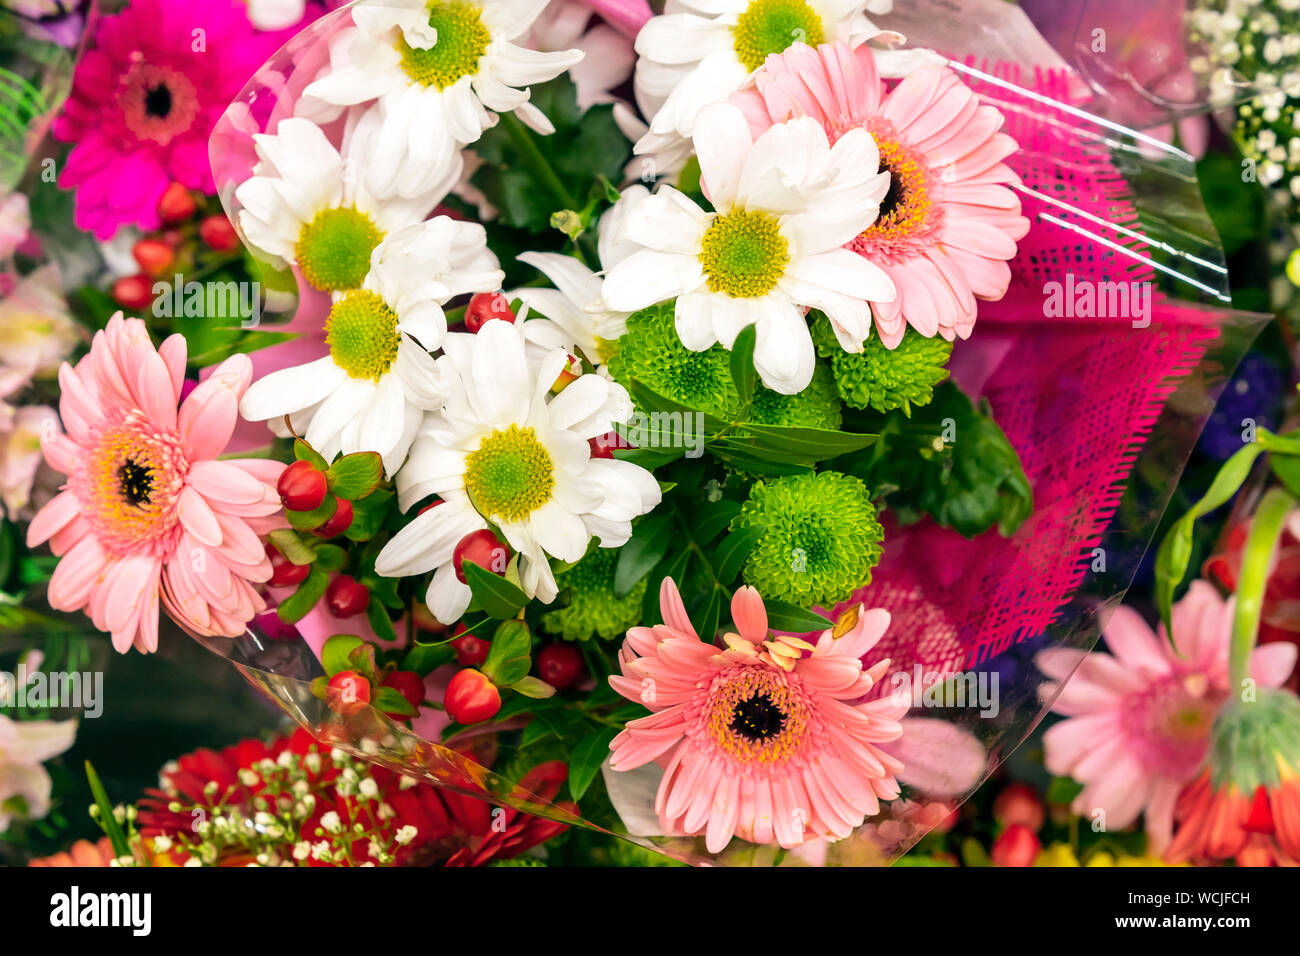 Top 999+ different types of flowers images – Amazing Collection ...